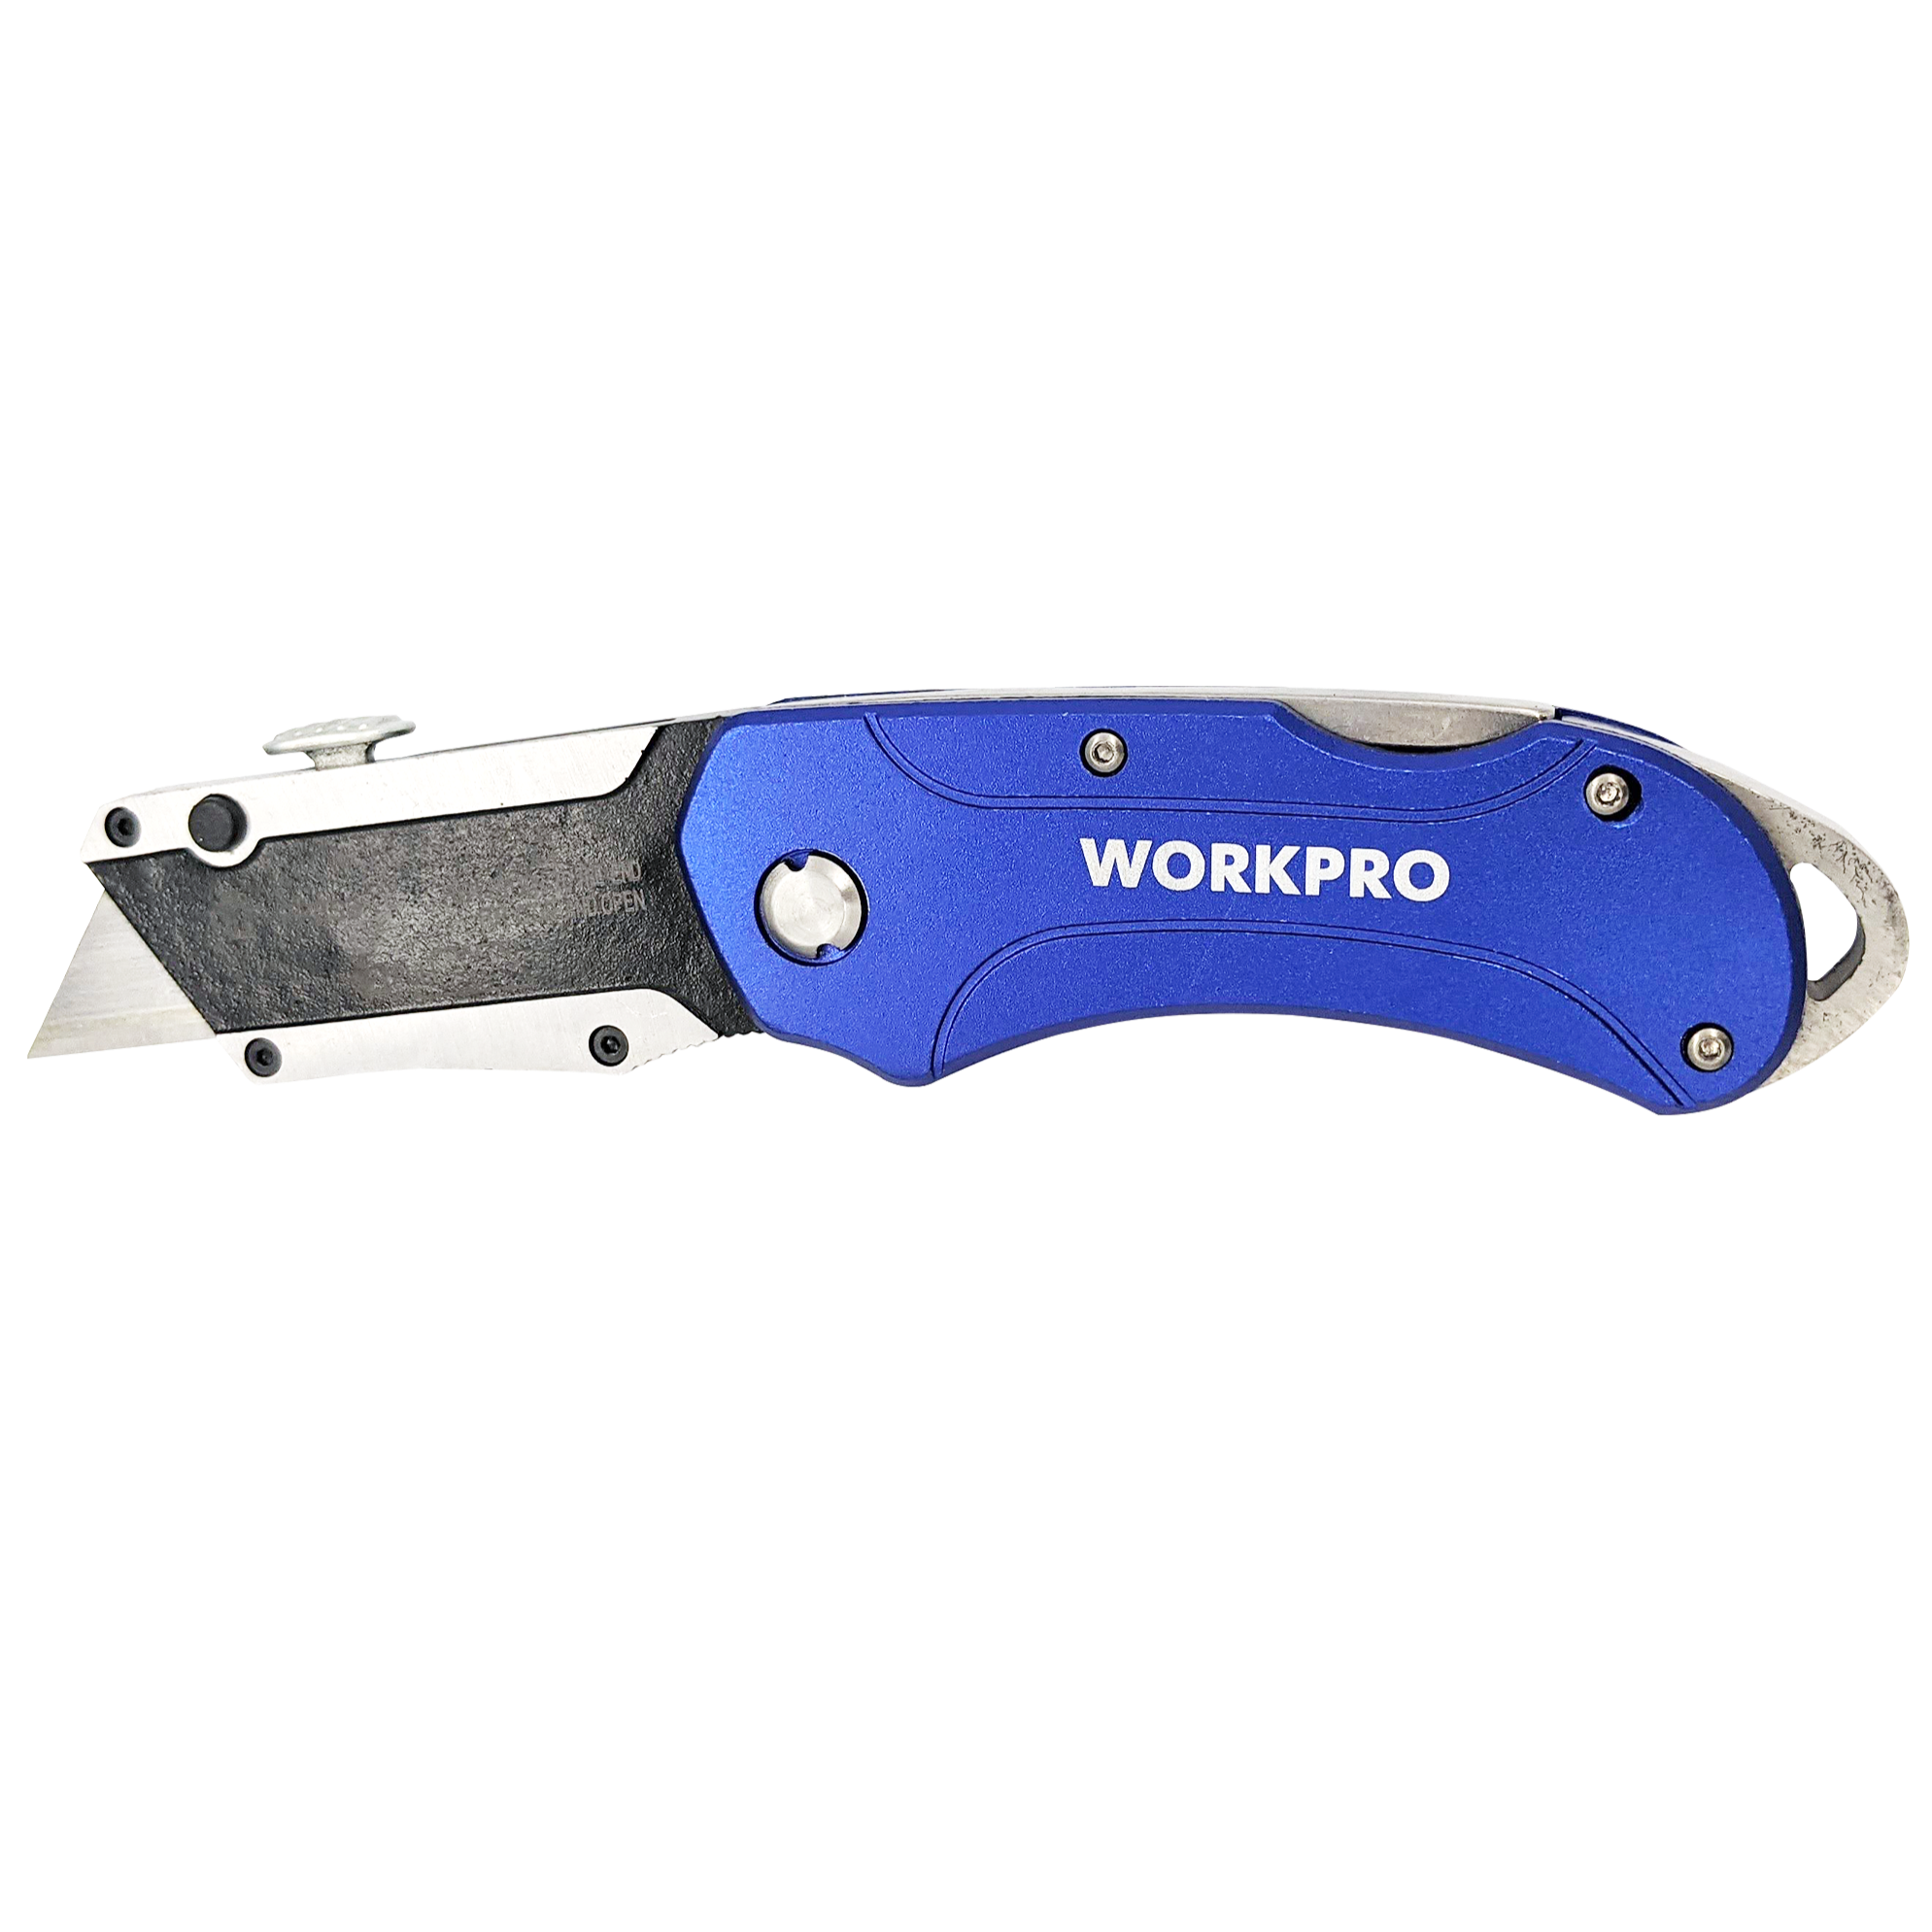 Workpro Retractable Folding Utility Knife